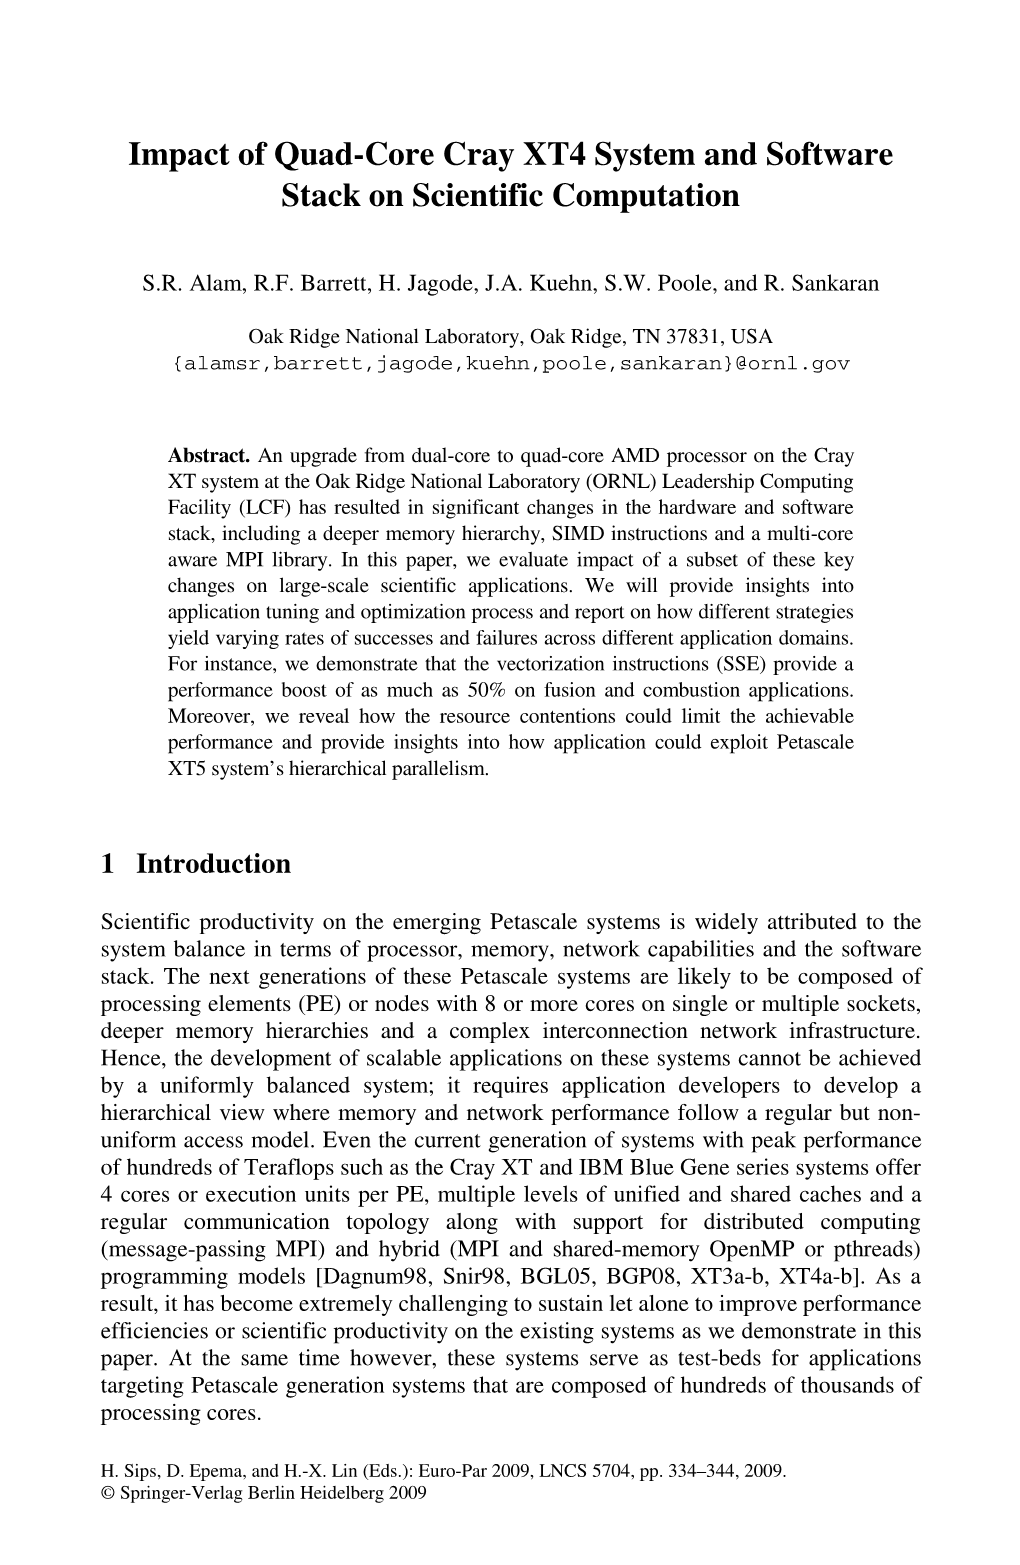 Impact of Quad-Core Cray XT4 System and Software Stack on Scientific Computation